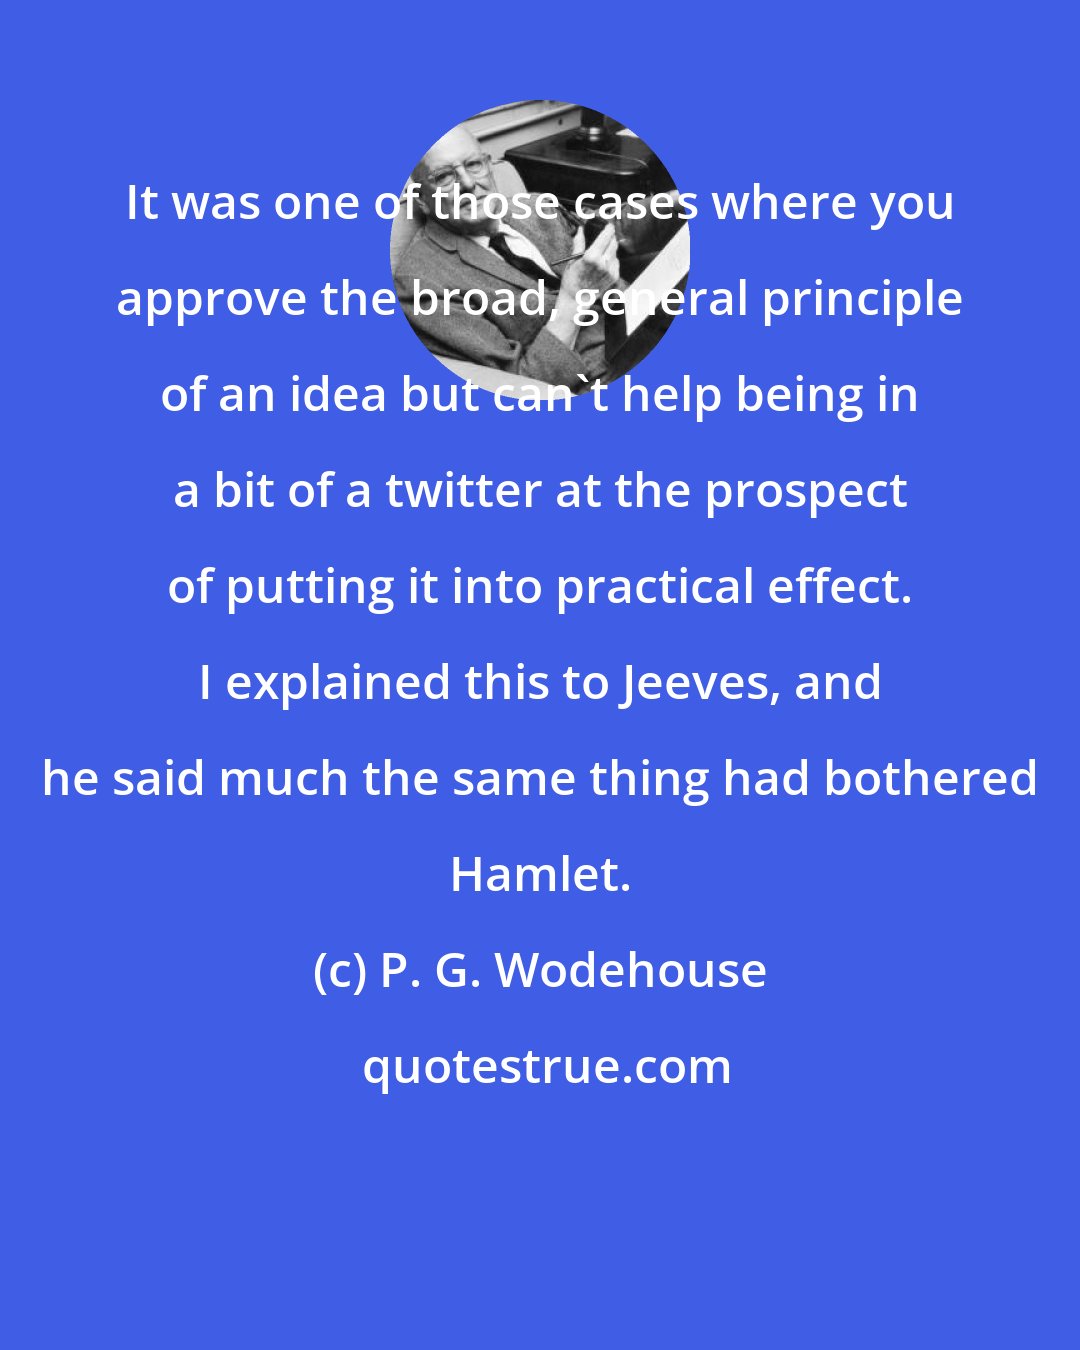 P. G. Wodehouse: It was one of those cases where you approve the broad, general principle of an idea but can't help being in a bit of a twitter at the prospect of putting it into practical effect. I explained this to Jeeves, and he said much the same thing had bothered Hamlet.